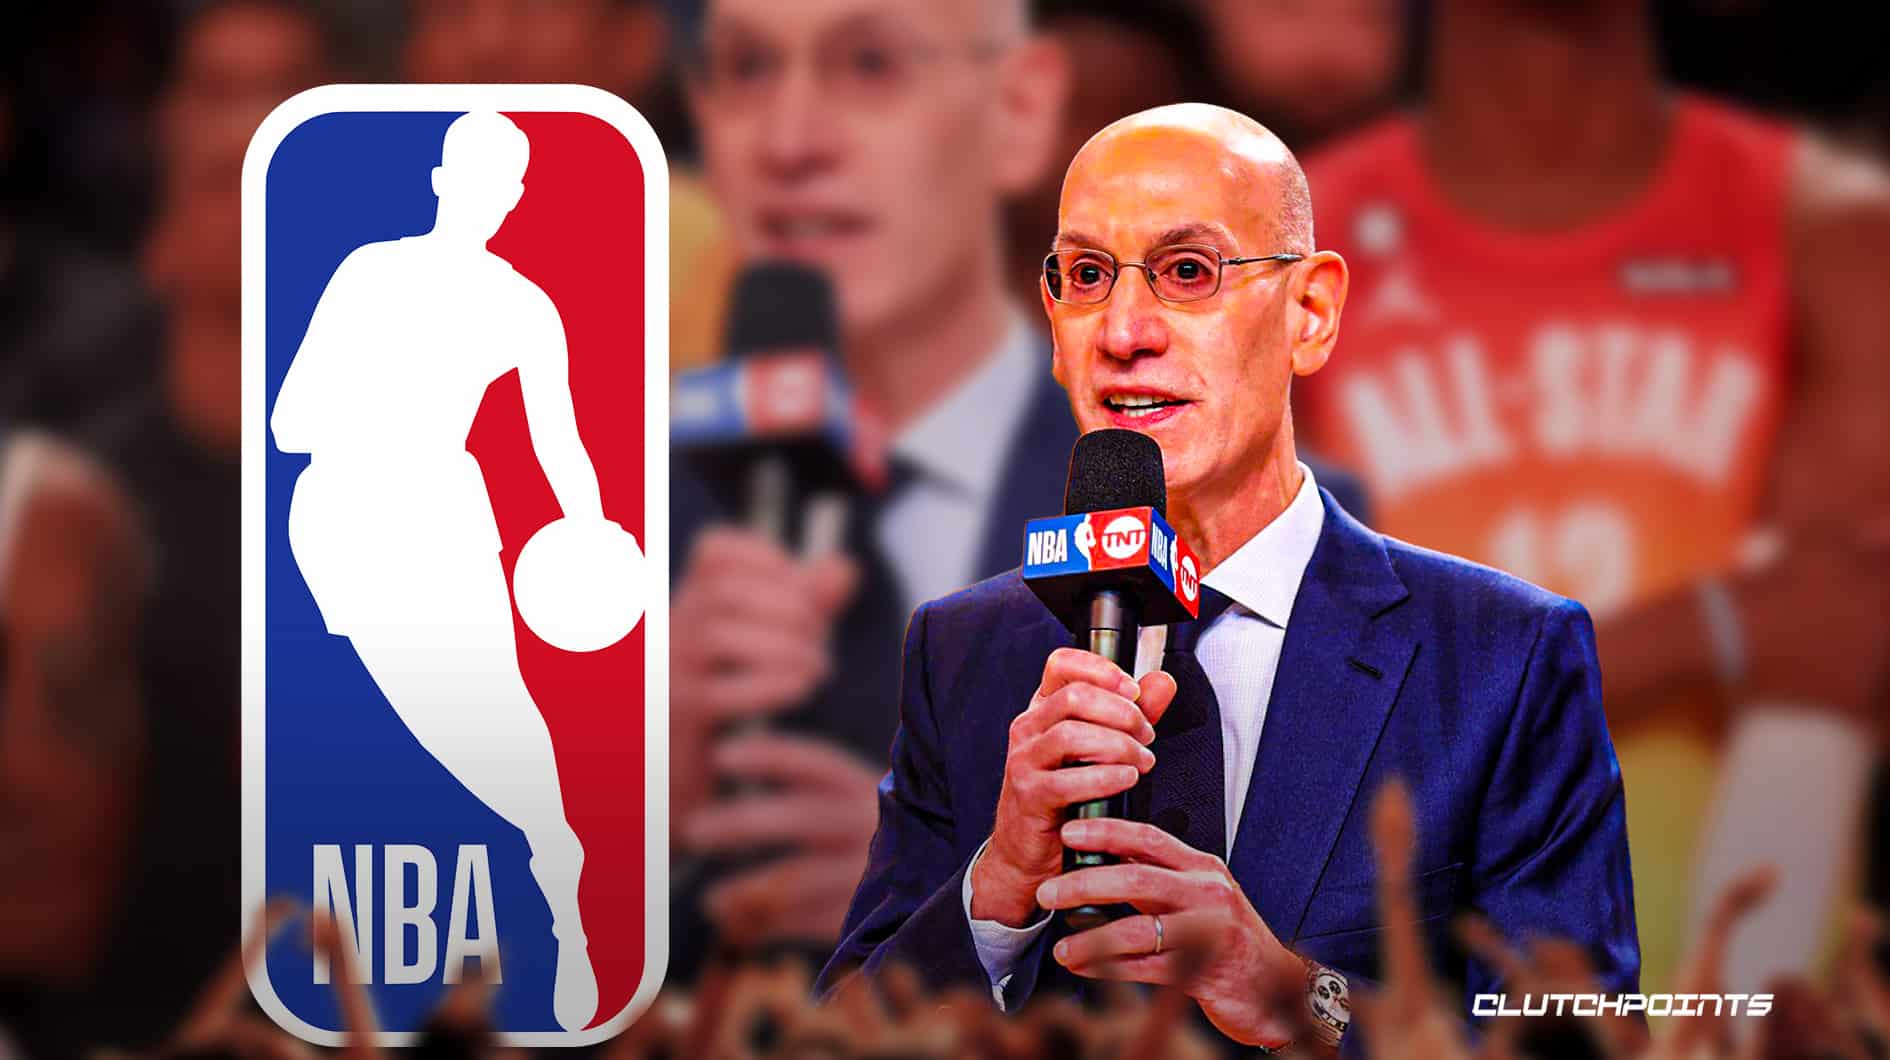 NBA, NBPA announce that playoffs will resume on Saturday, update